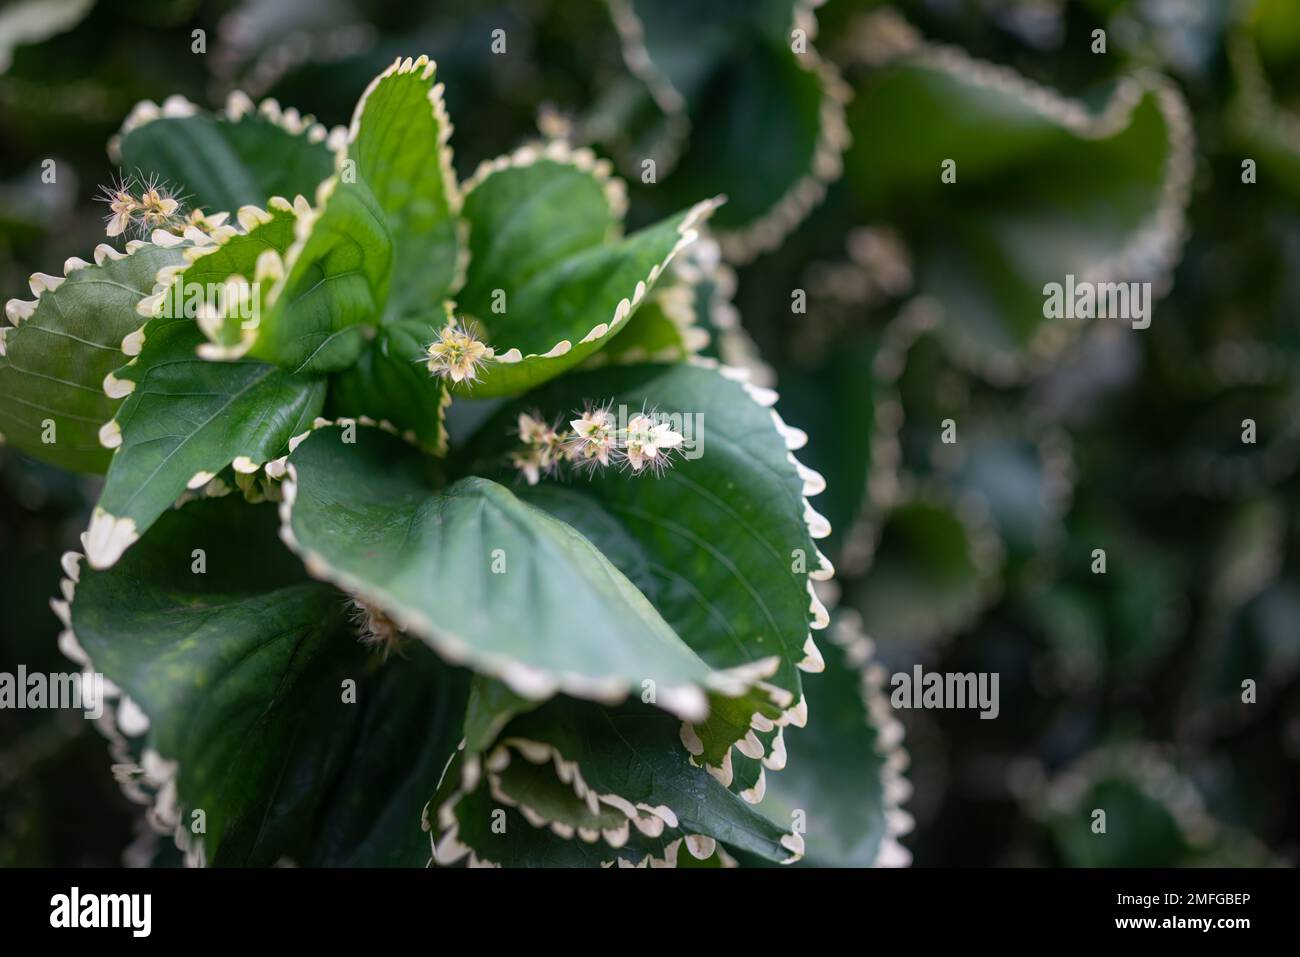 Mostly blurred variety of Copper leaf plant with white toothed edges and flower Stock Photo